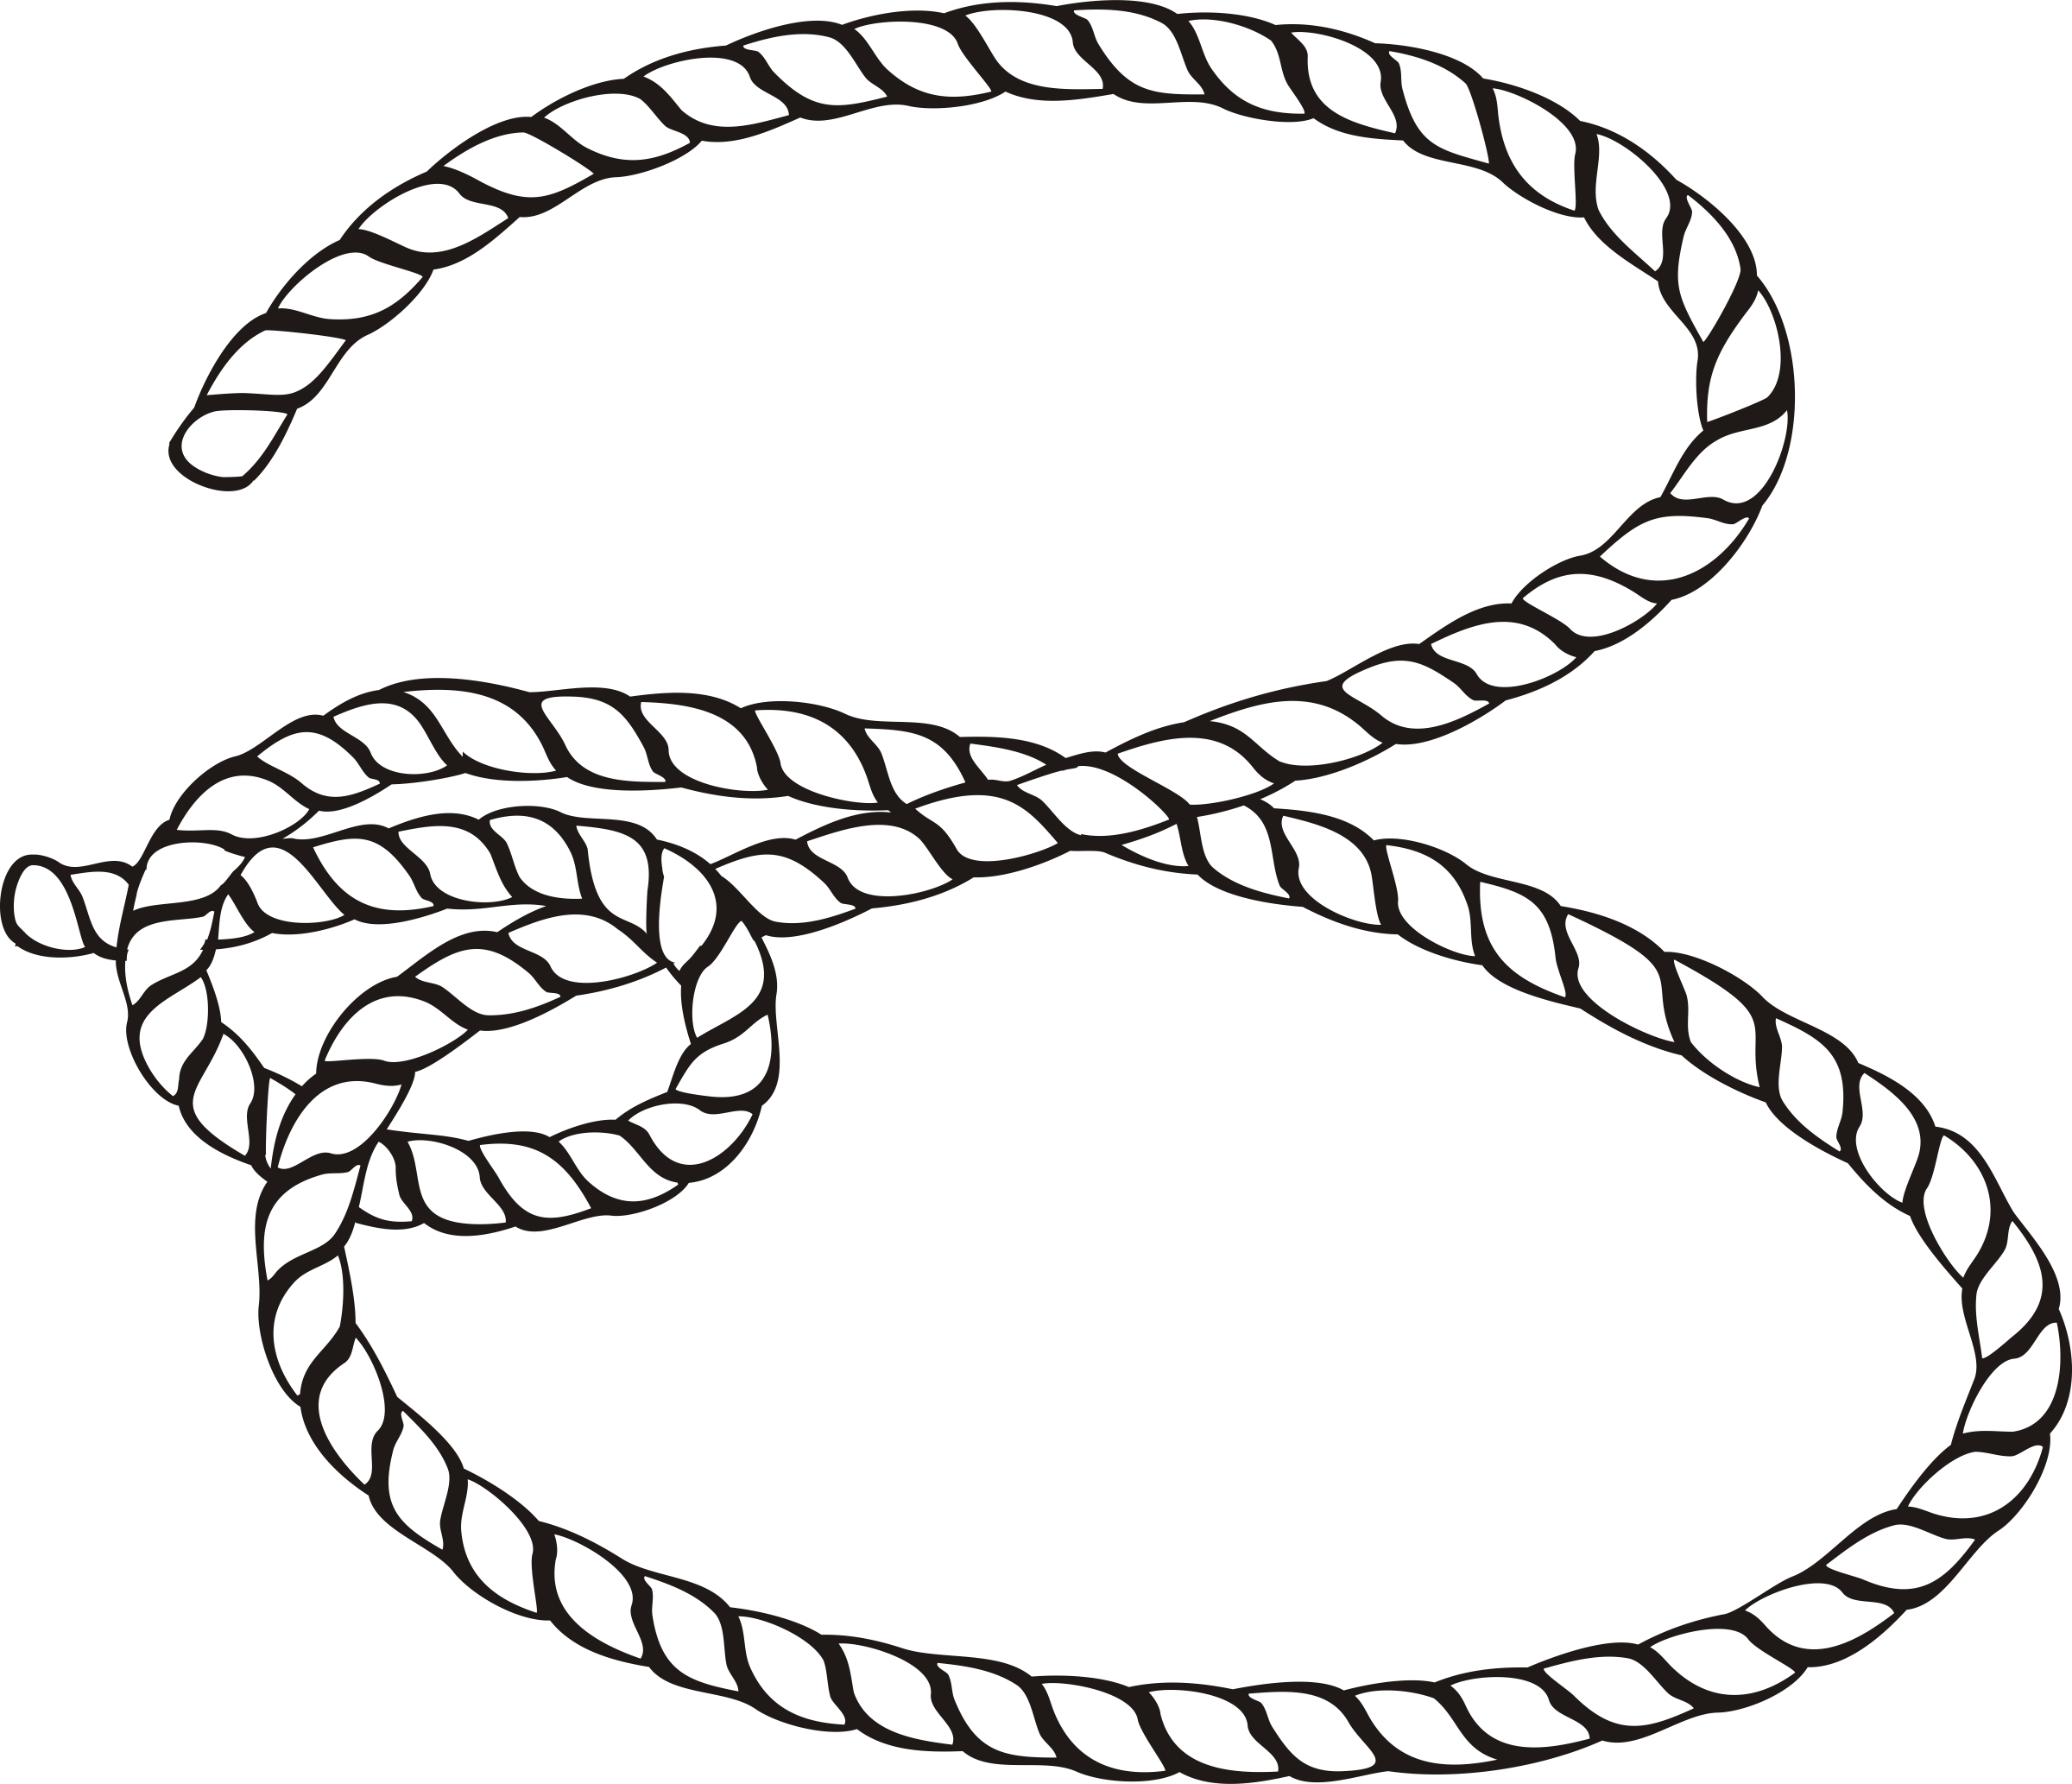 Big Image - Rope Clipart Black And White - (2400x2066) Png Clipart Download